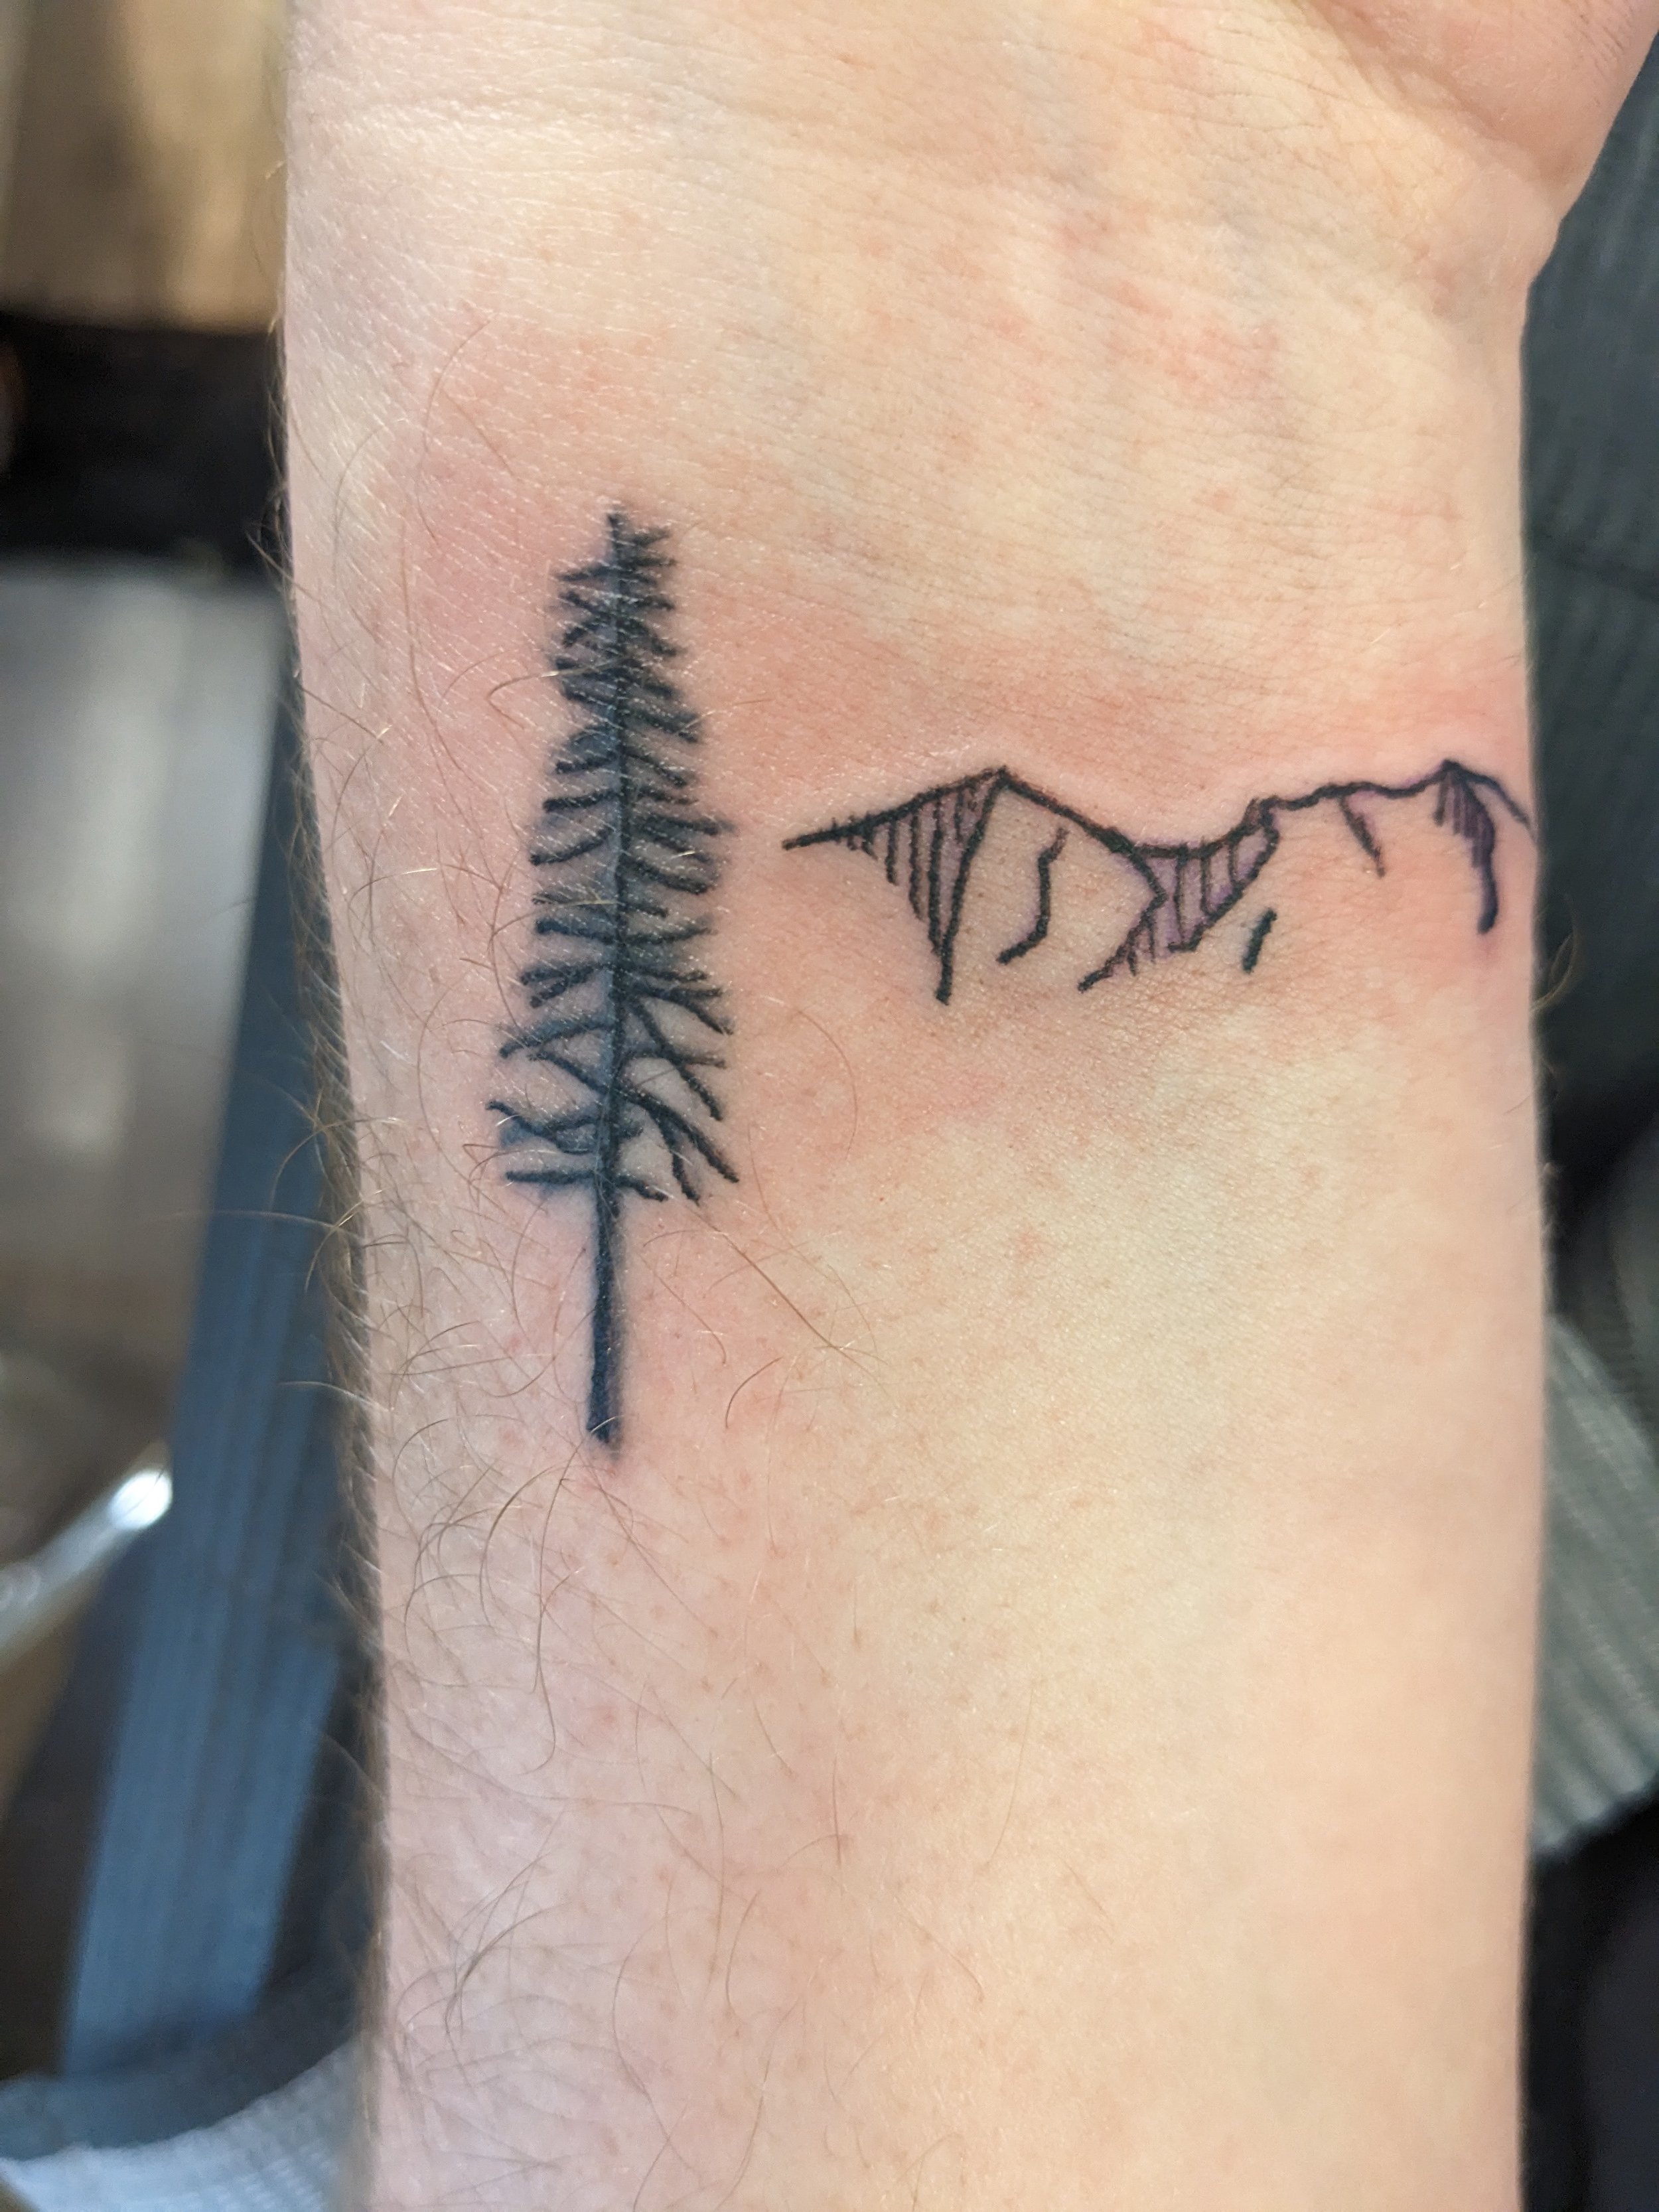 DZUL INK LOUNGE on Twitter Adopt the pace of nature her secret is  patience Tattoo by Alex dzul dzulink dzulinklounge pnw pnwtattoo  treetattoo treetattoosleeve westcoast westcoastbestcoast pinetree  pinetreetattoo seattle 